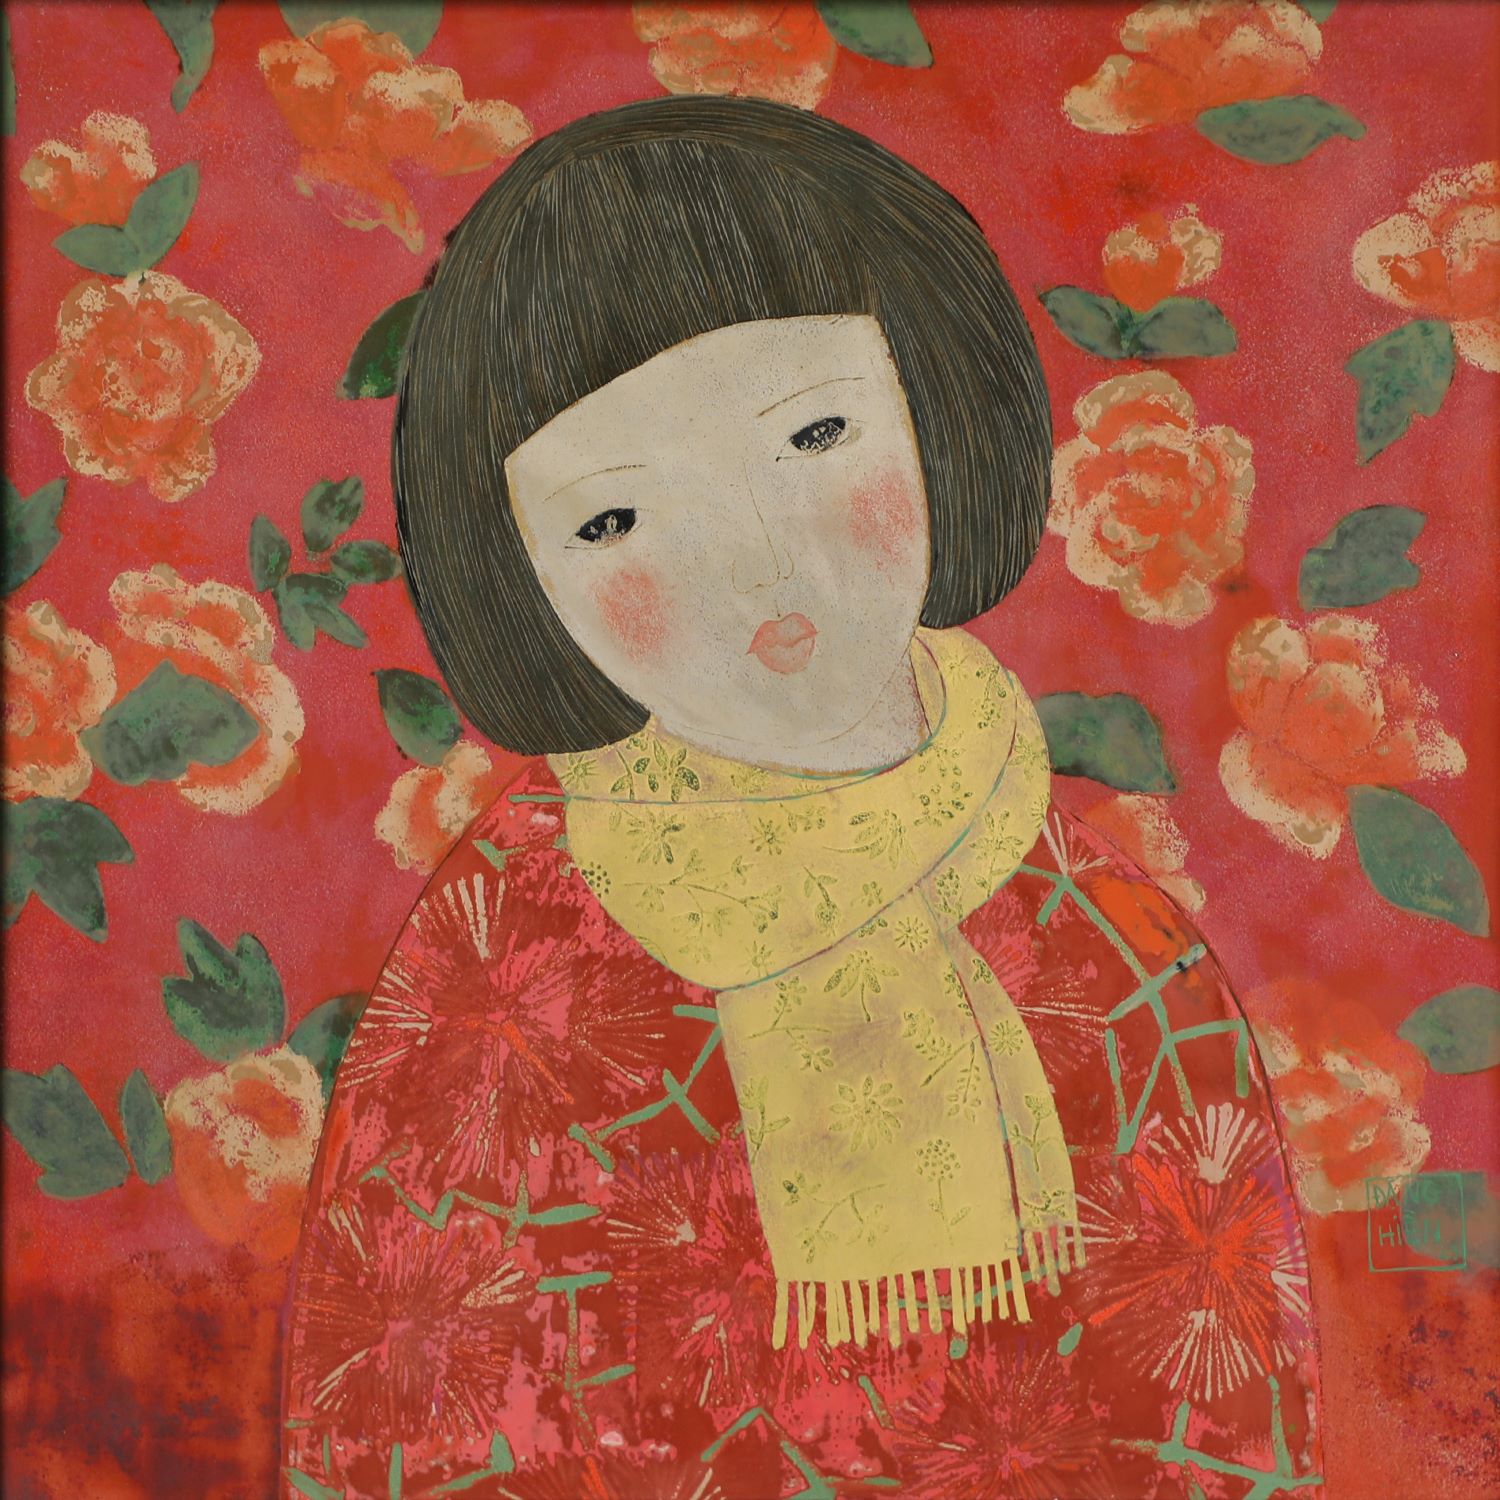 Camellia - Vietnamese Lacquer Painting by Artist Dang Hien